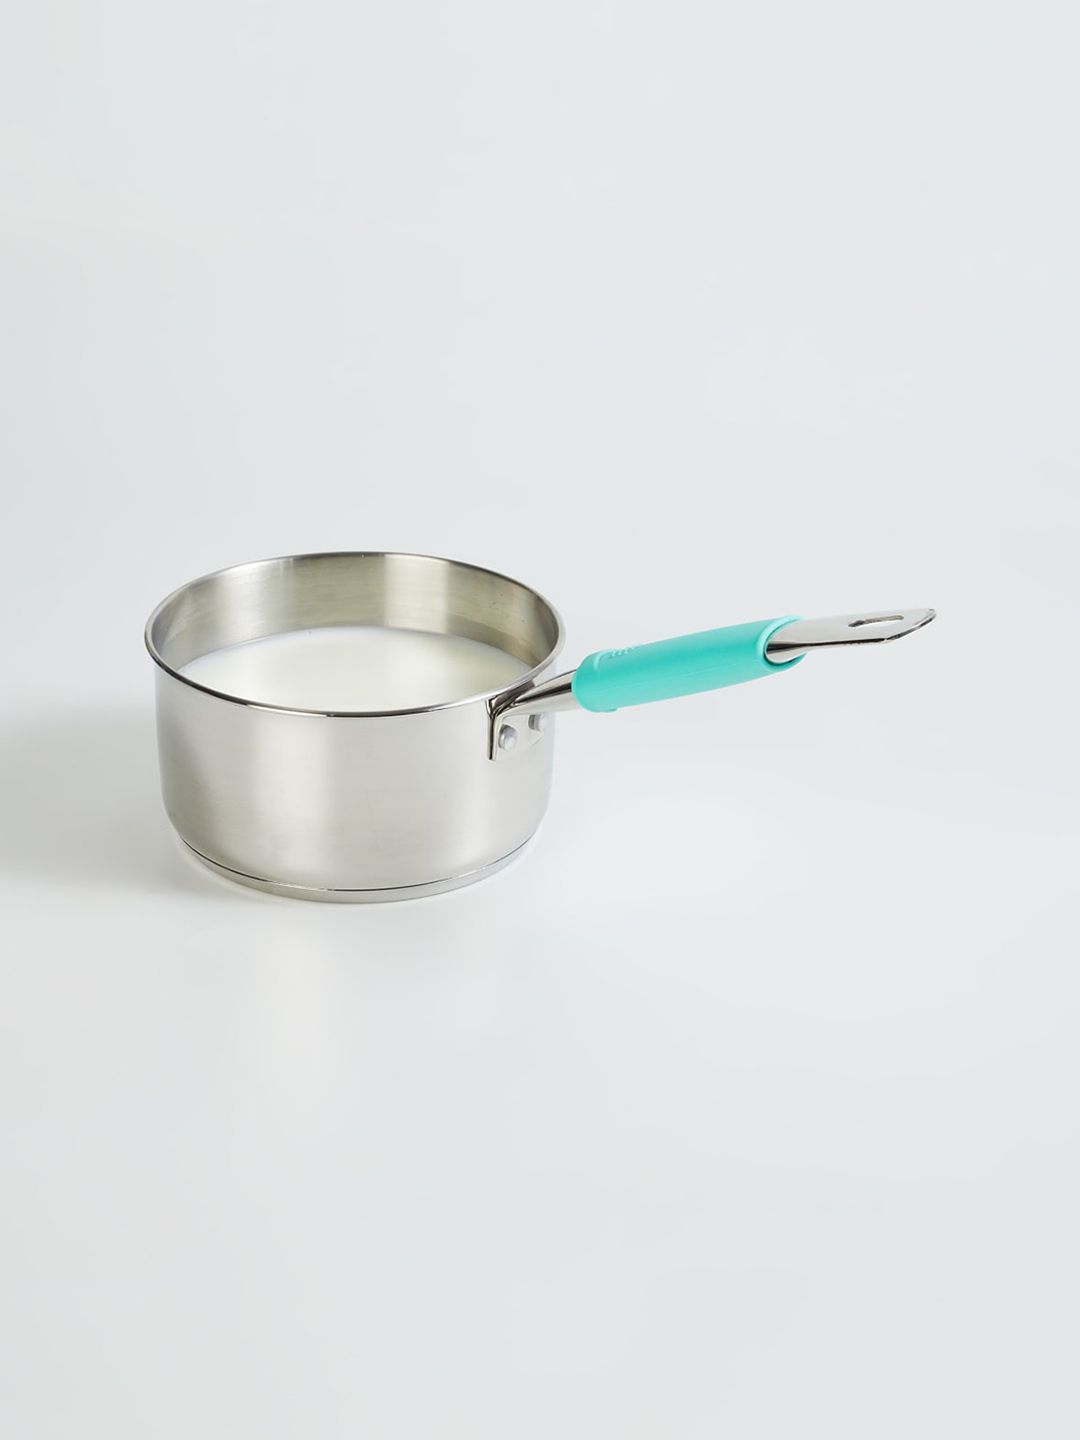 Home Centre Teal Blue & Silver-Toned Stainless Steel Milk Pan 1.6 L Price in India